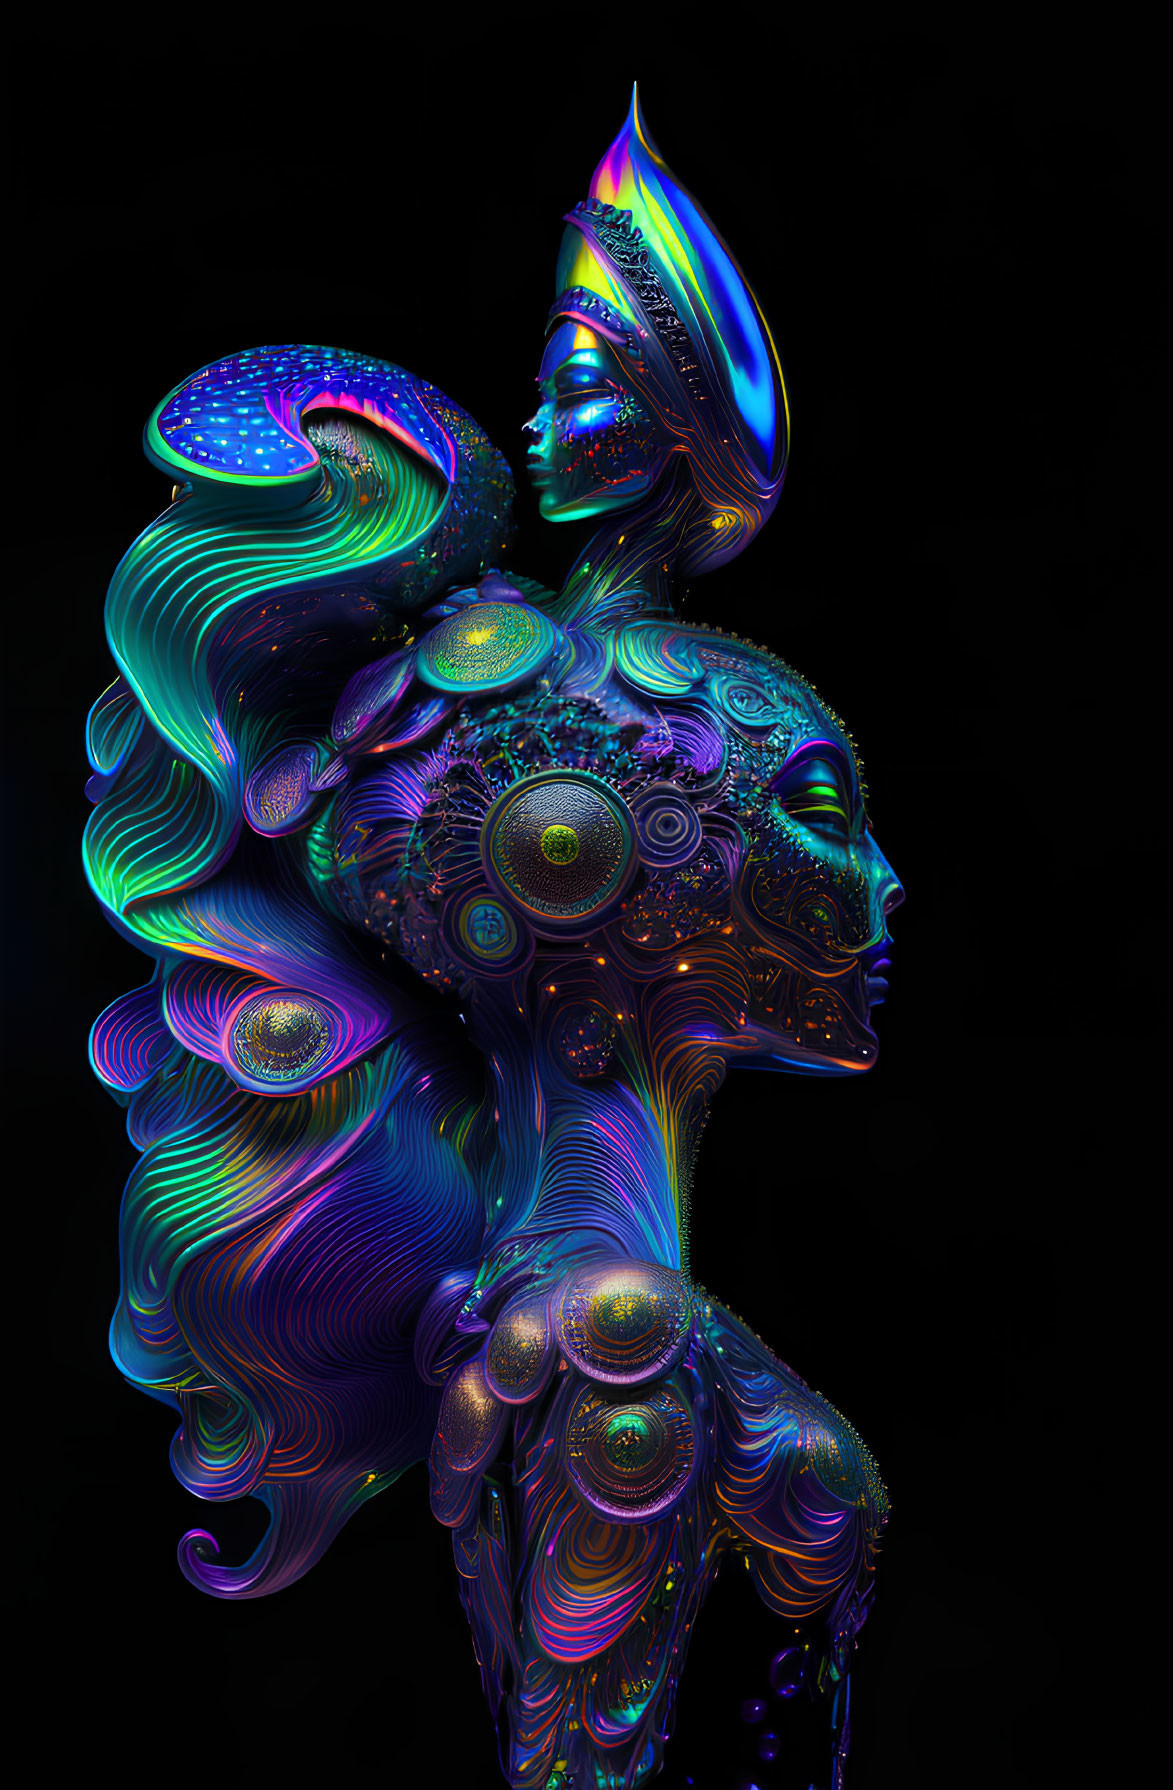 Vibrant digital art: surreal human face profile with psychedelic patterns on black.